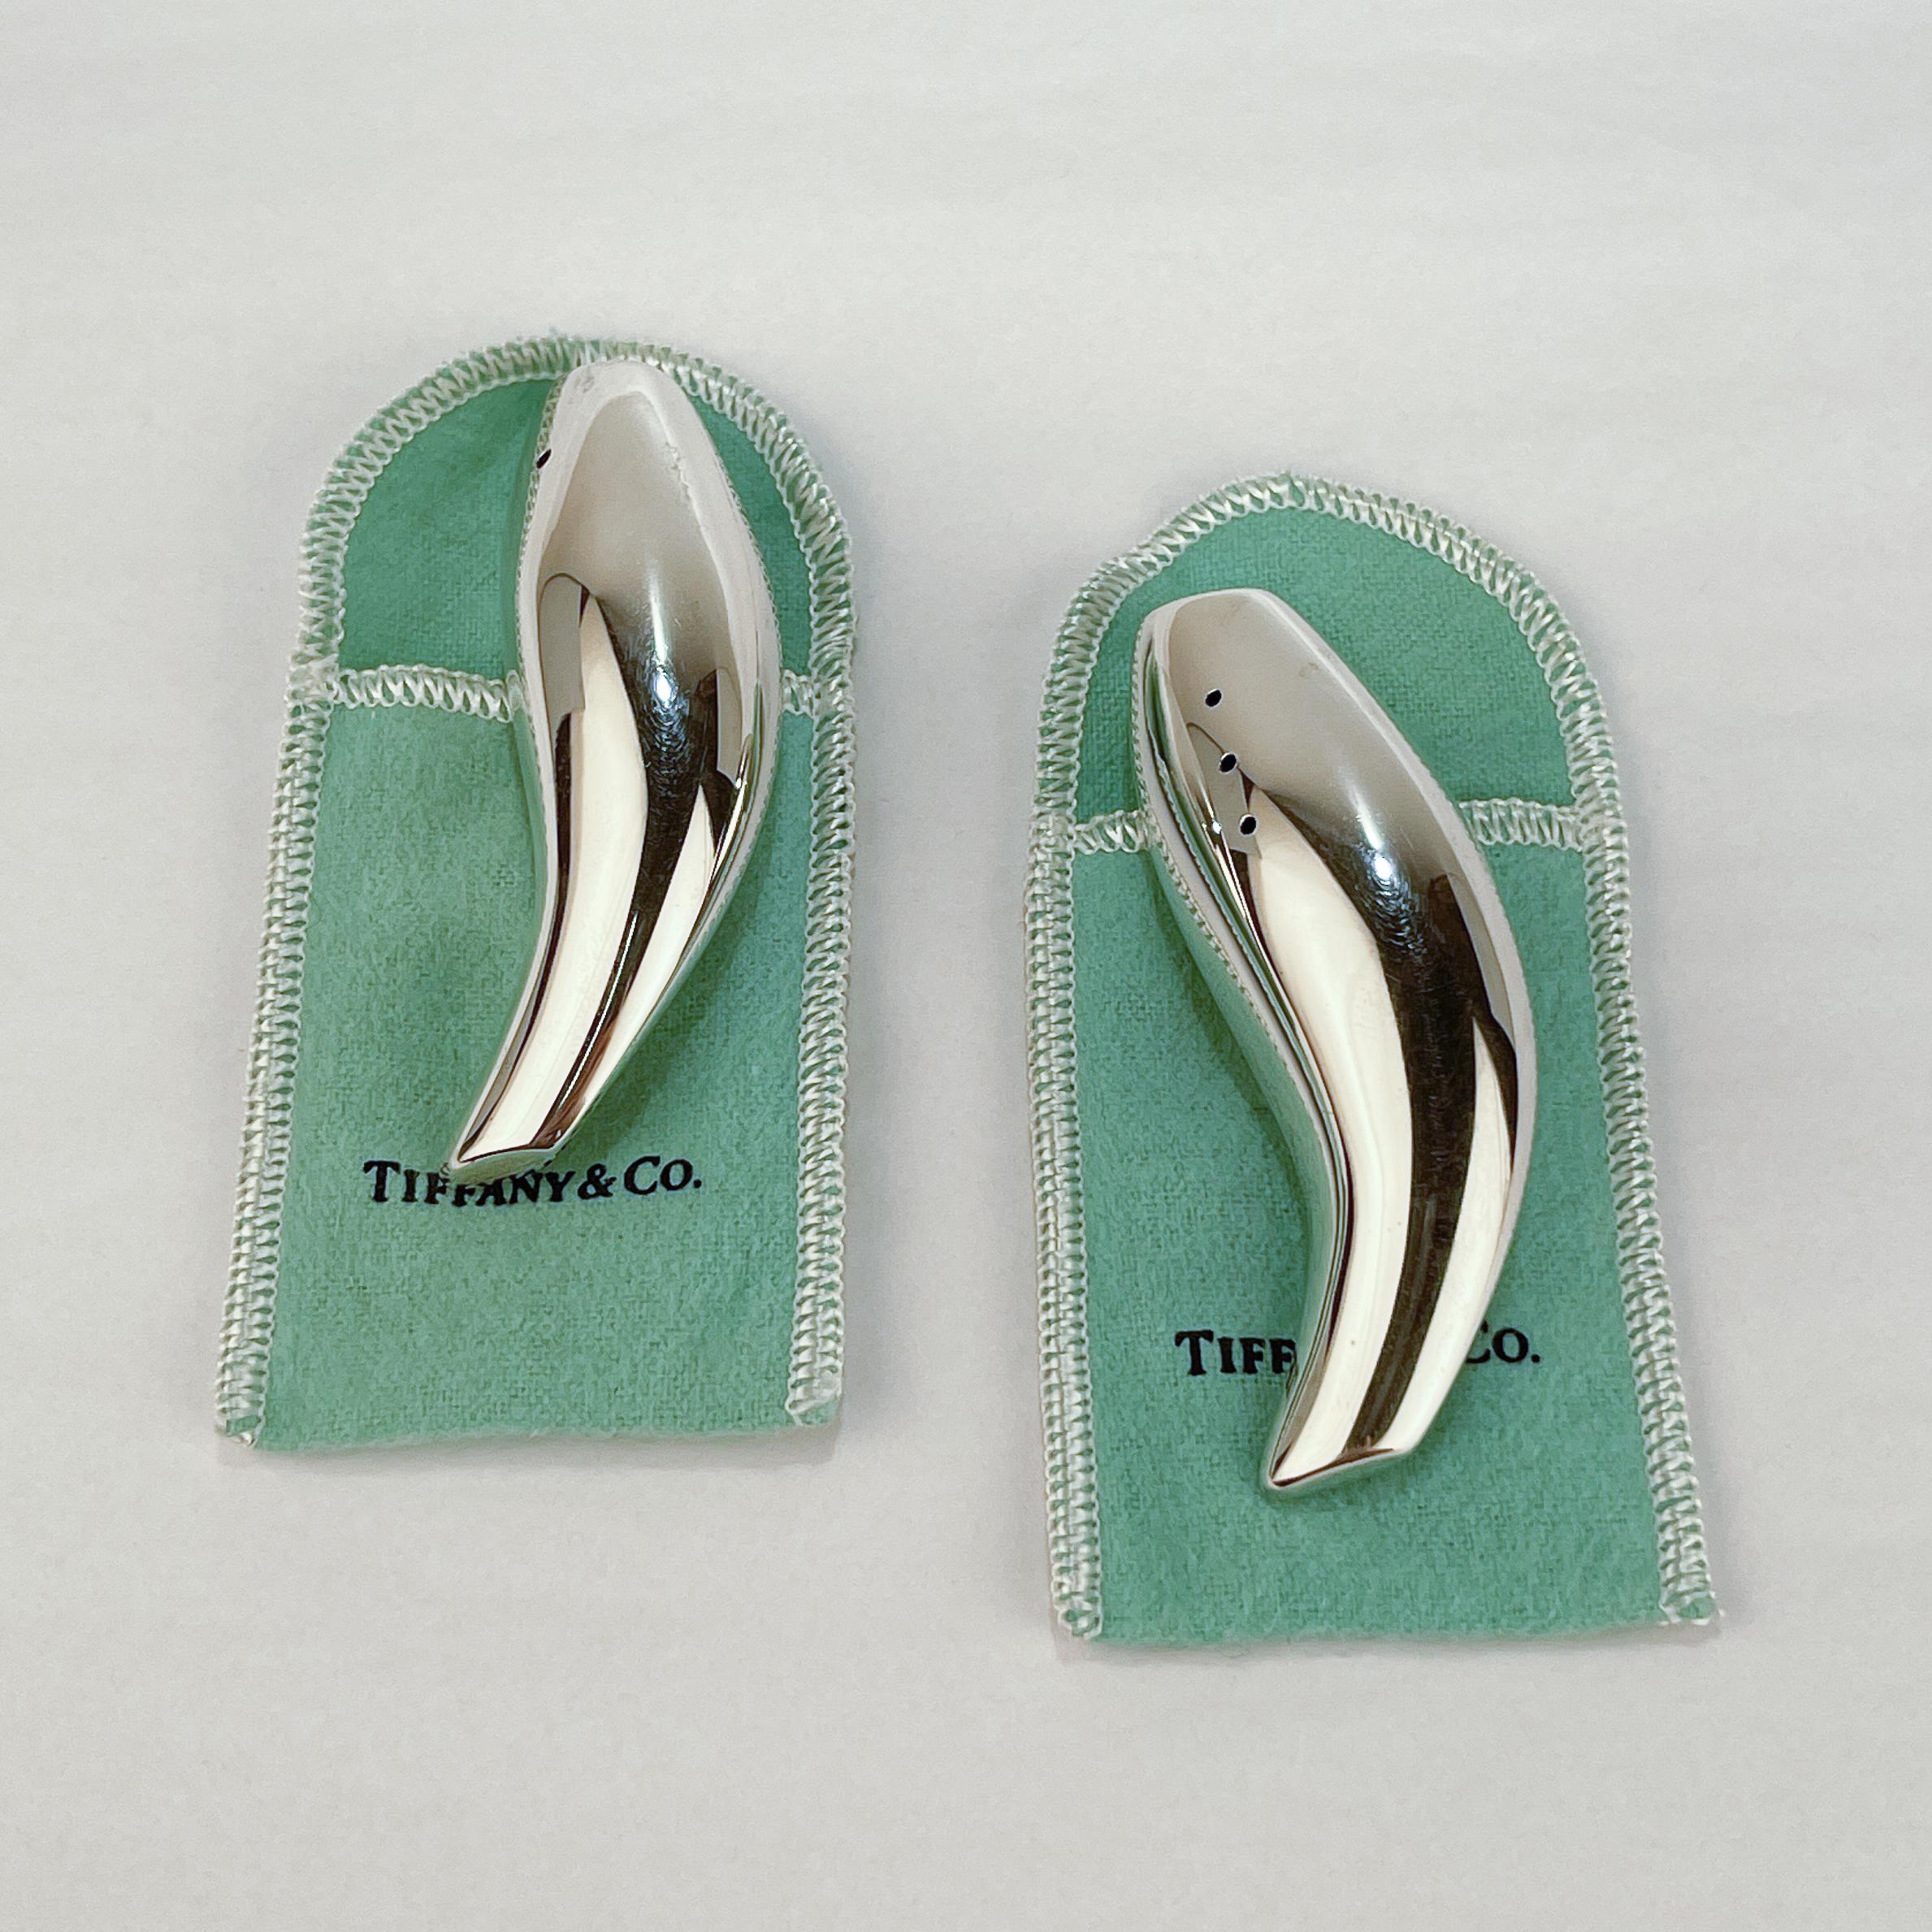 Tiffany & Co. Sterling Silver 'Fish' Salt & Pepper Shakers by Frank Gehry 6